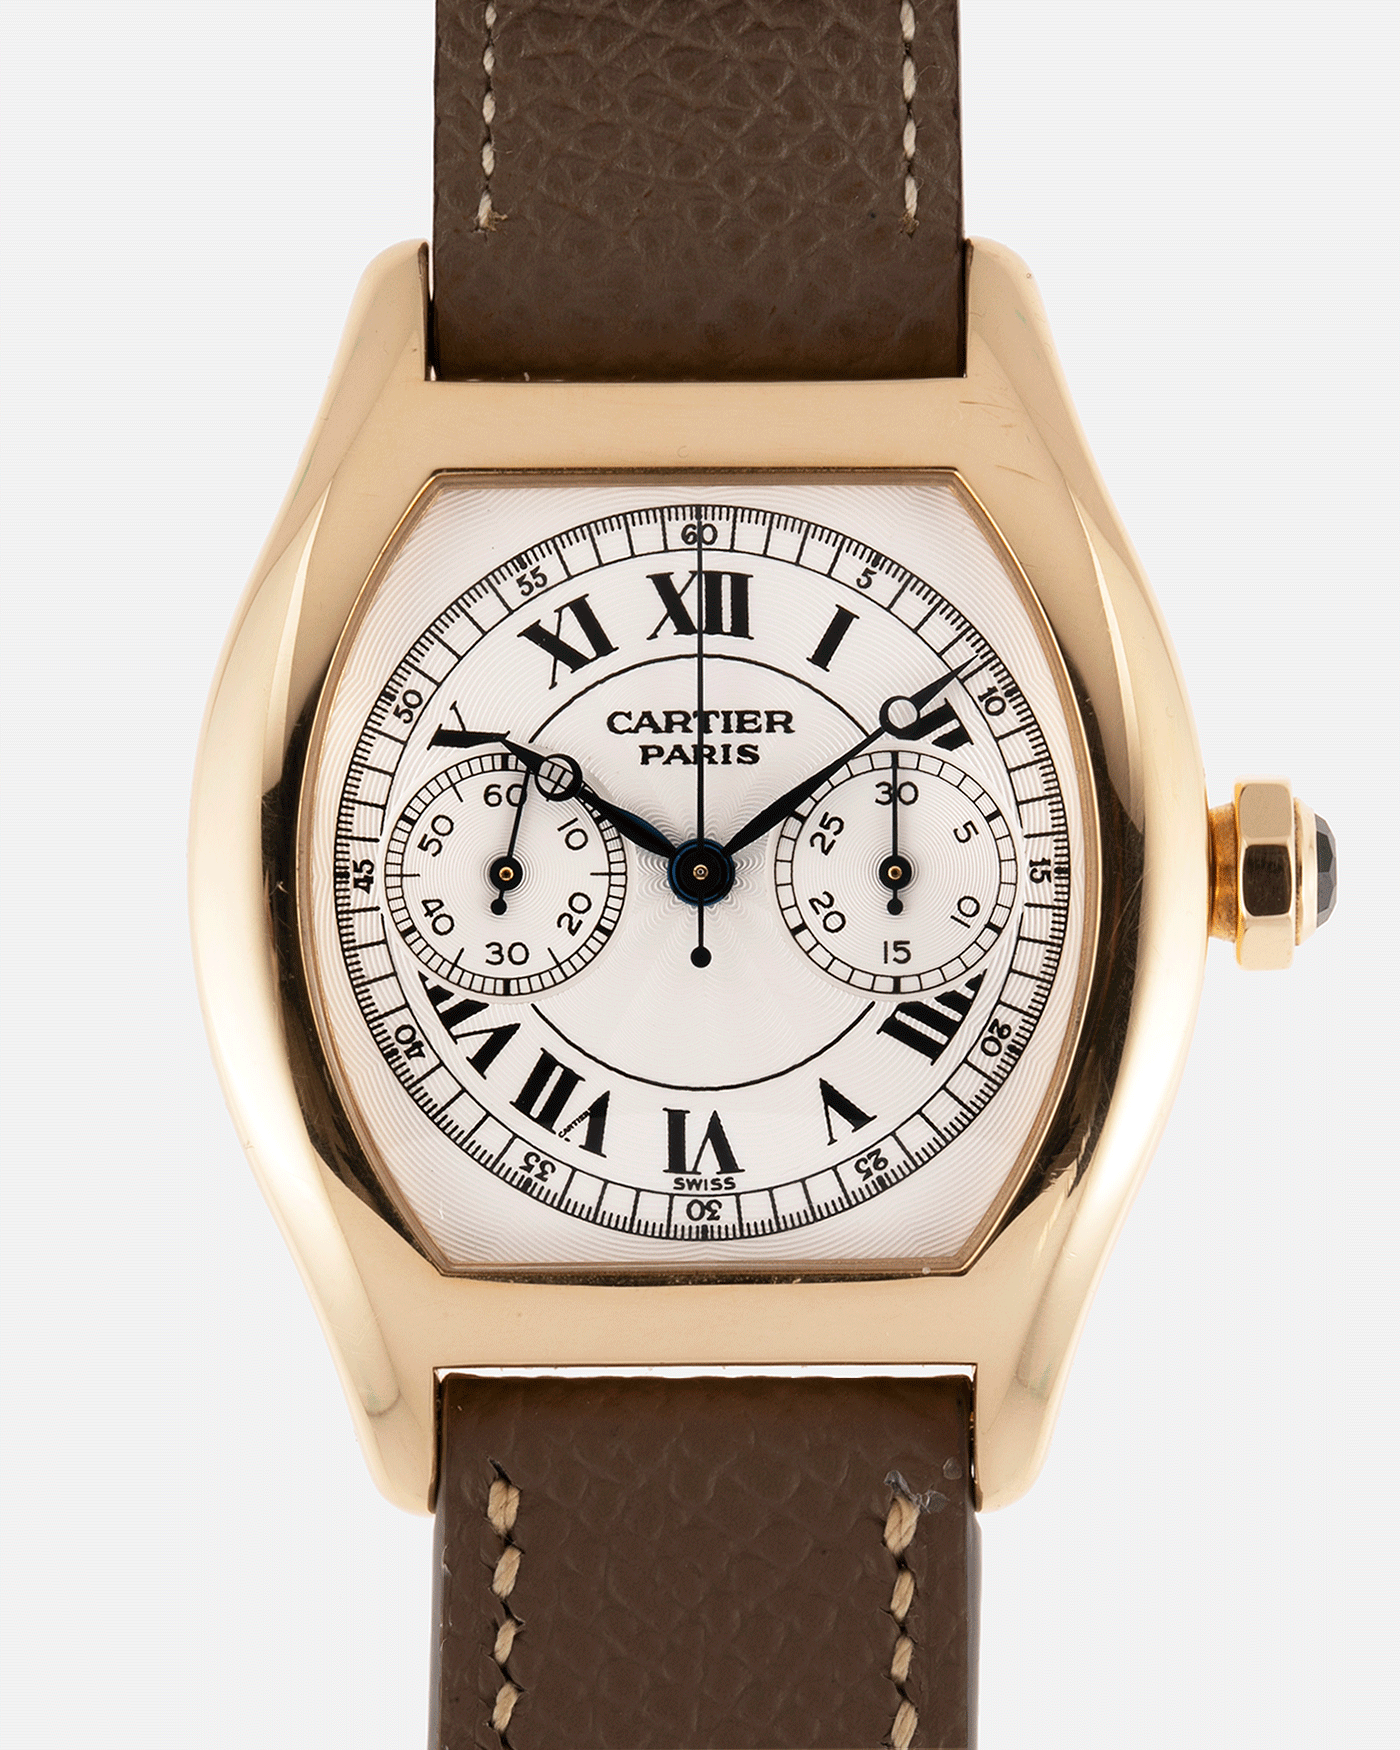 Brand: Cartier Year: 2000’s Model: CPCP Collection Prive Tortue Monopoussoir Reference: 2356E Material: 18k Yellow Gold Movement: THA Cal. 045MC Case Diameter: 43 x 35 mm Strap: Cartier Nostime Taupe Grained Calf with 18k Cartier Yellow Gold Deployant F.P. Journe